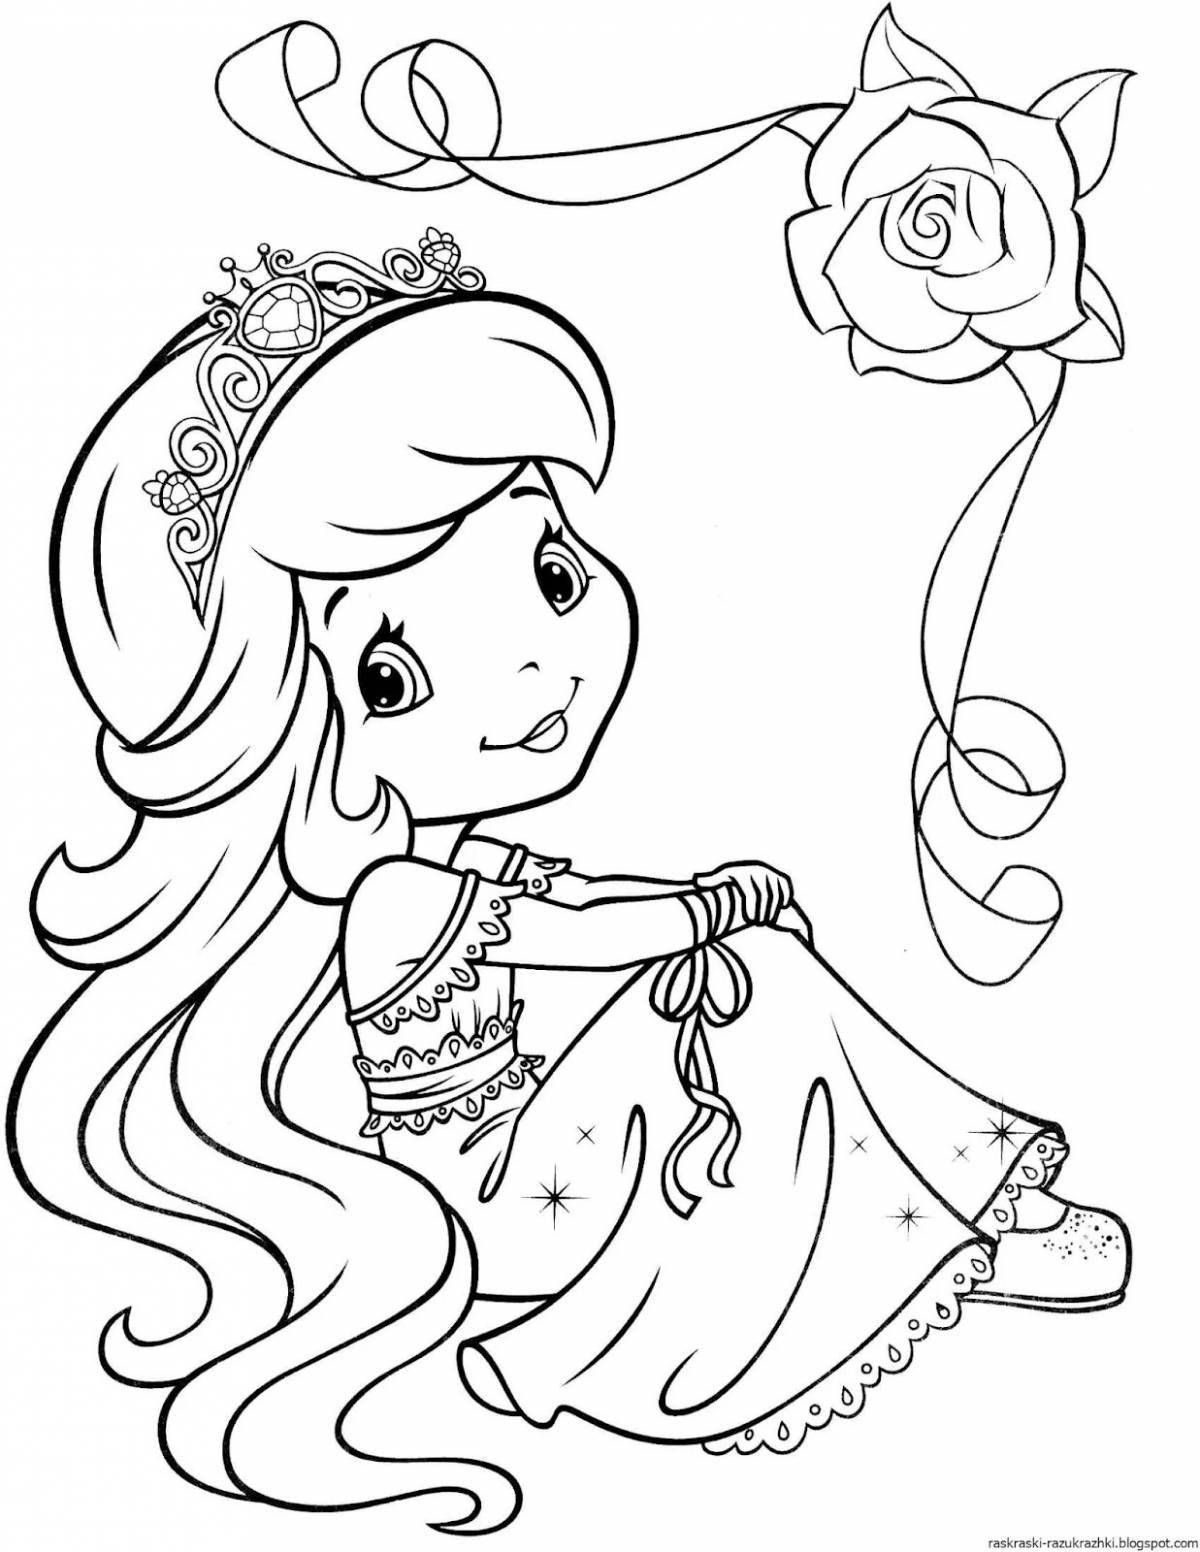 Charlotte magic strawberry coloring book for girls